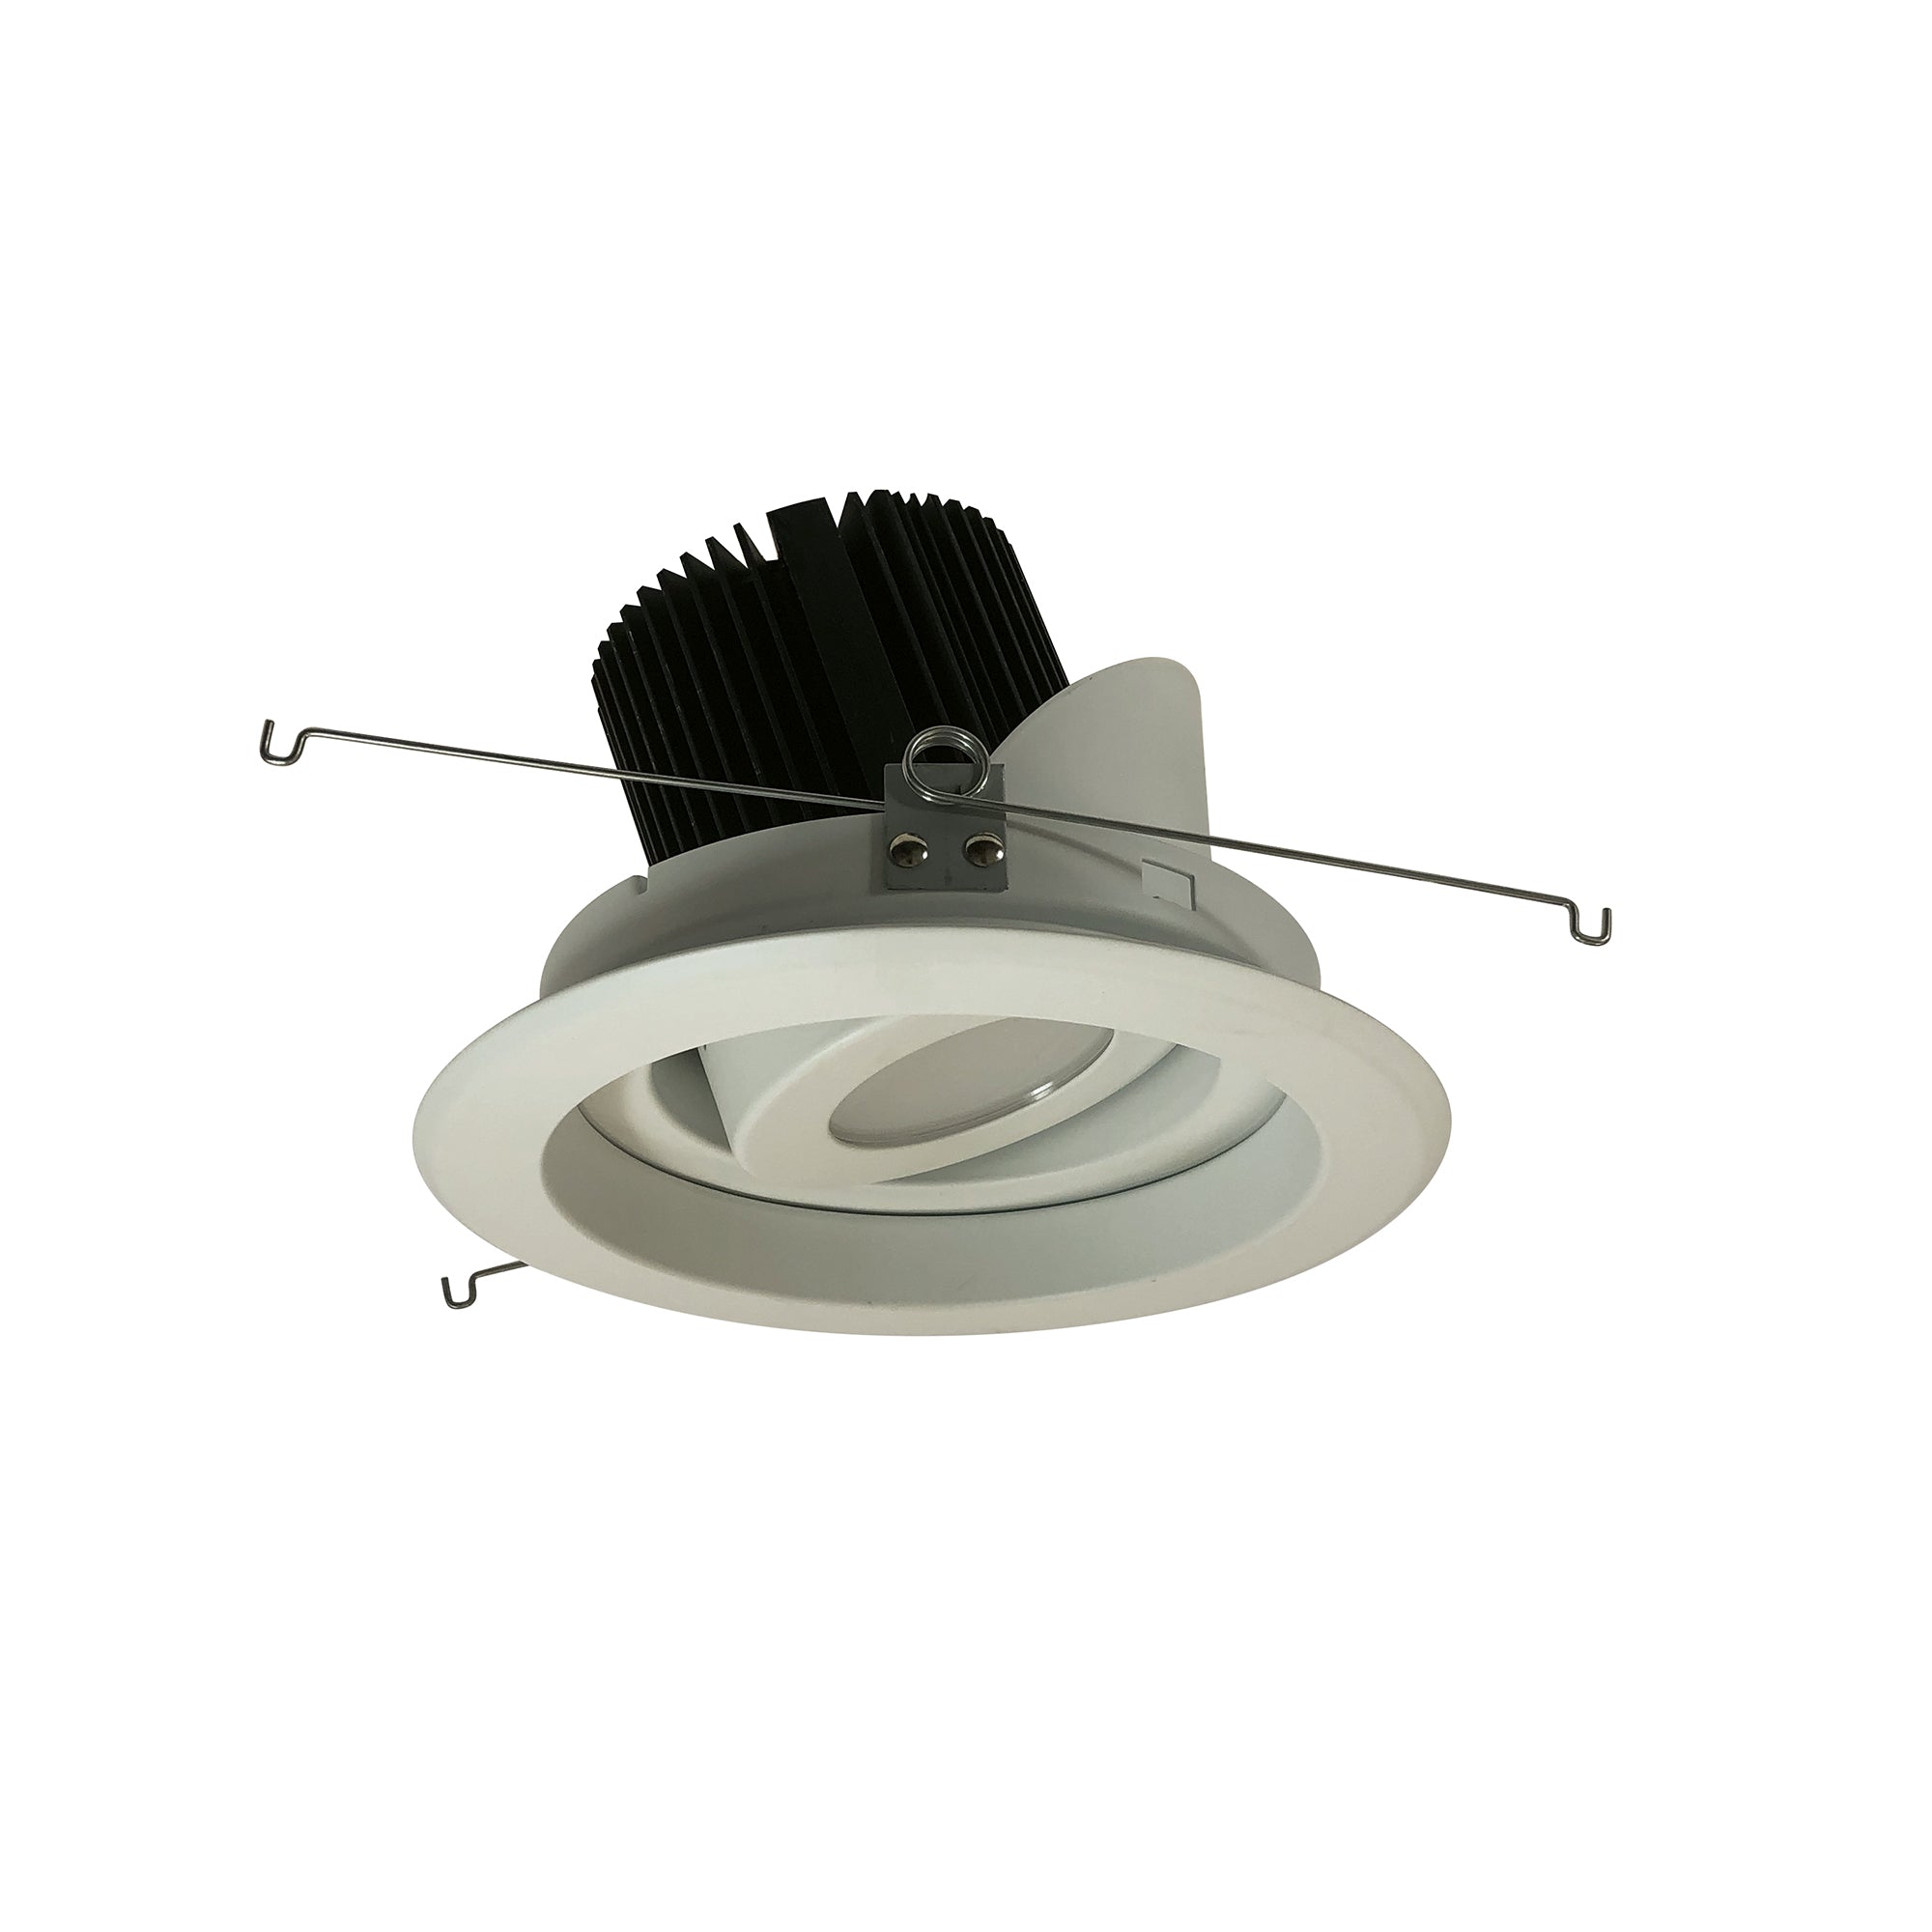 Nora Lighting NRM2-619L2535FWW - Recessed - 6 Inch Marquise II Round Regressed Adj. Reflector, Flood, 2500lm, 3500K, White (Not Compatible with NHRM2-625 Housings)